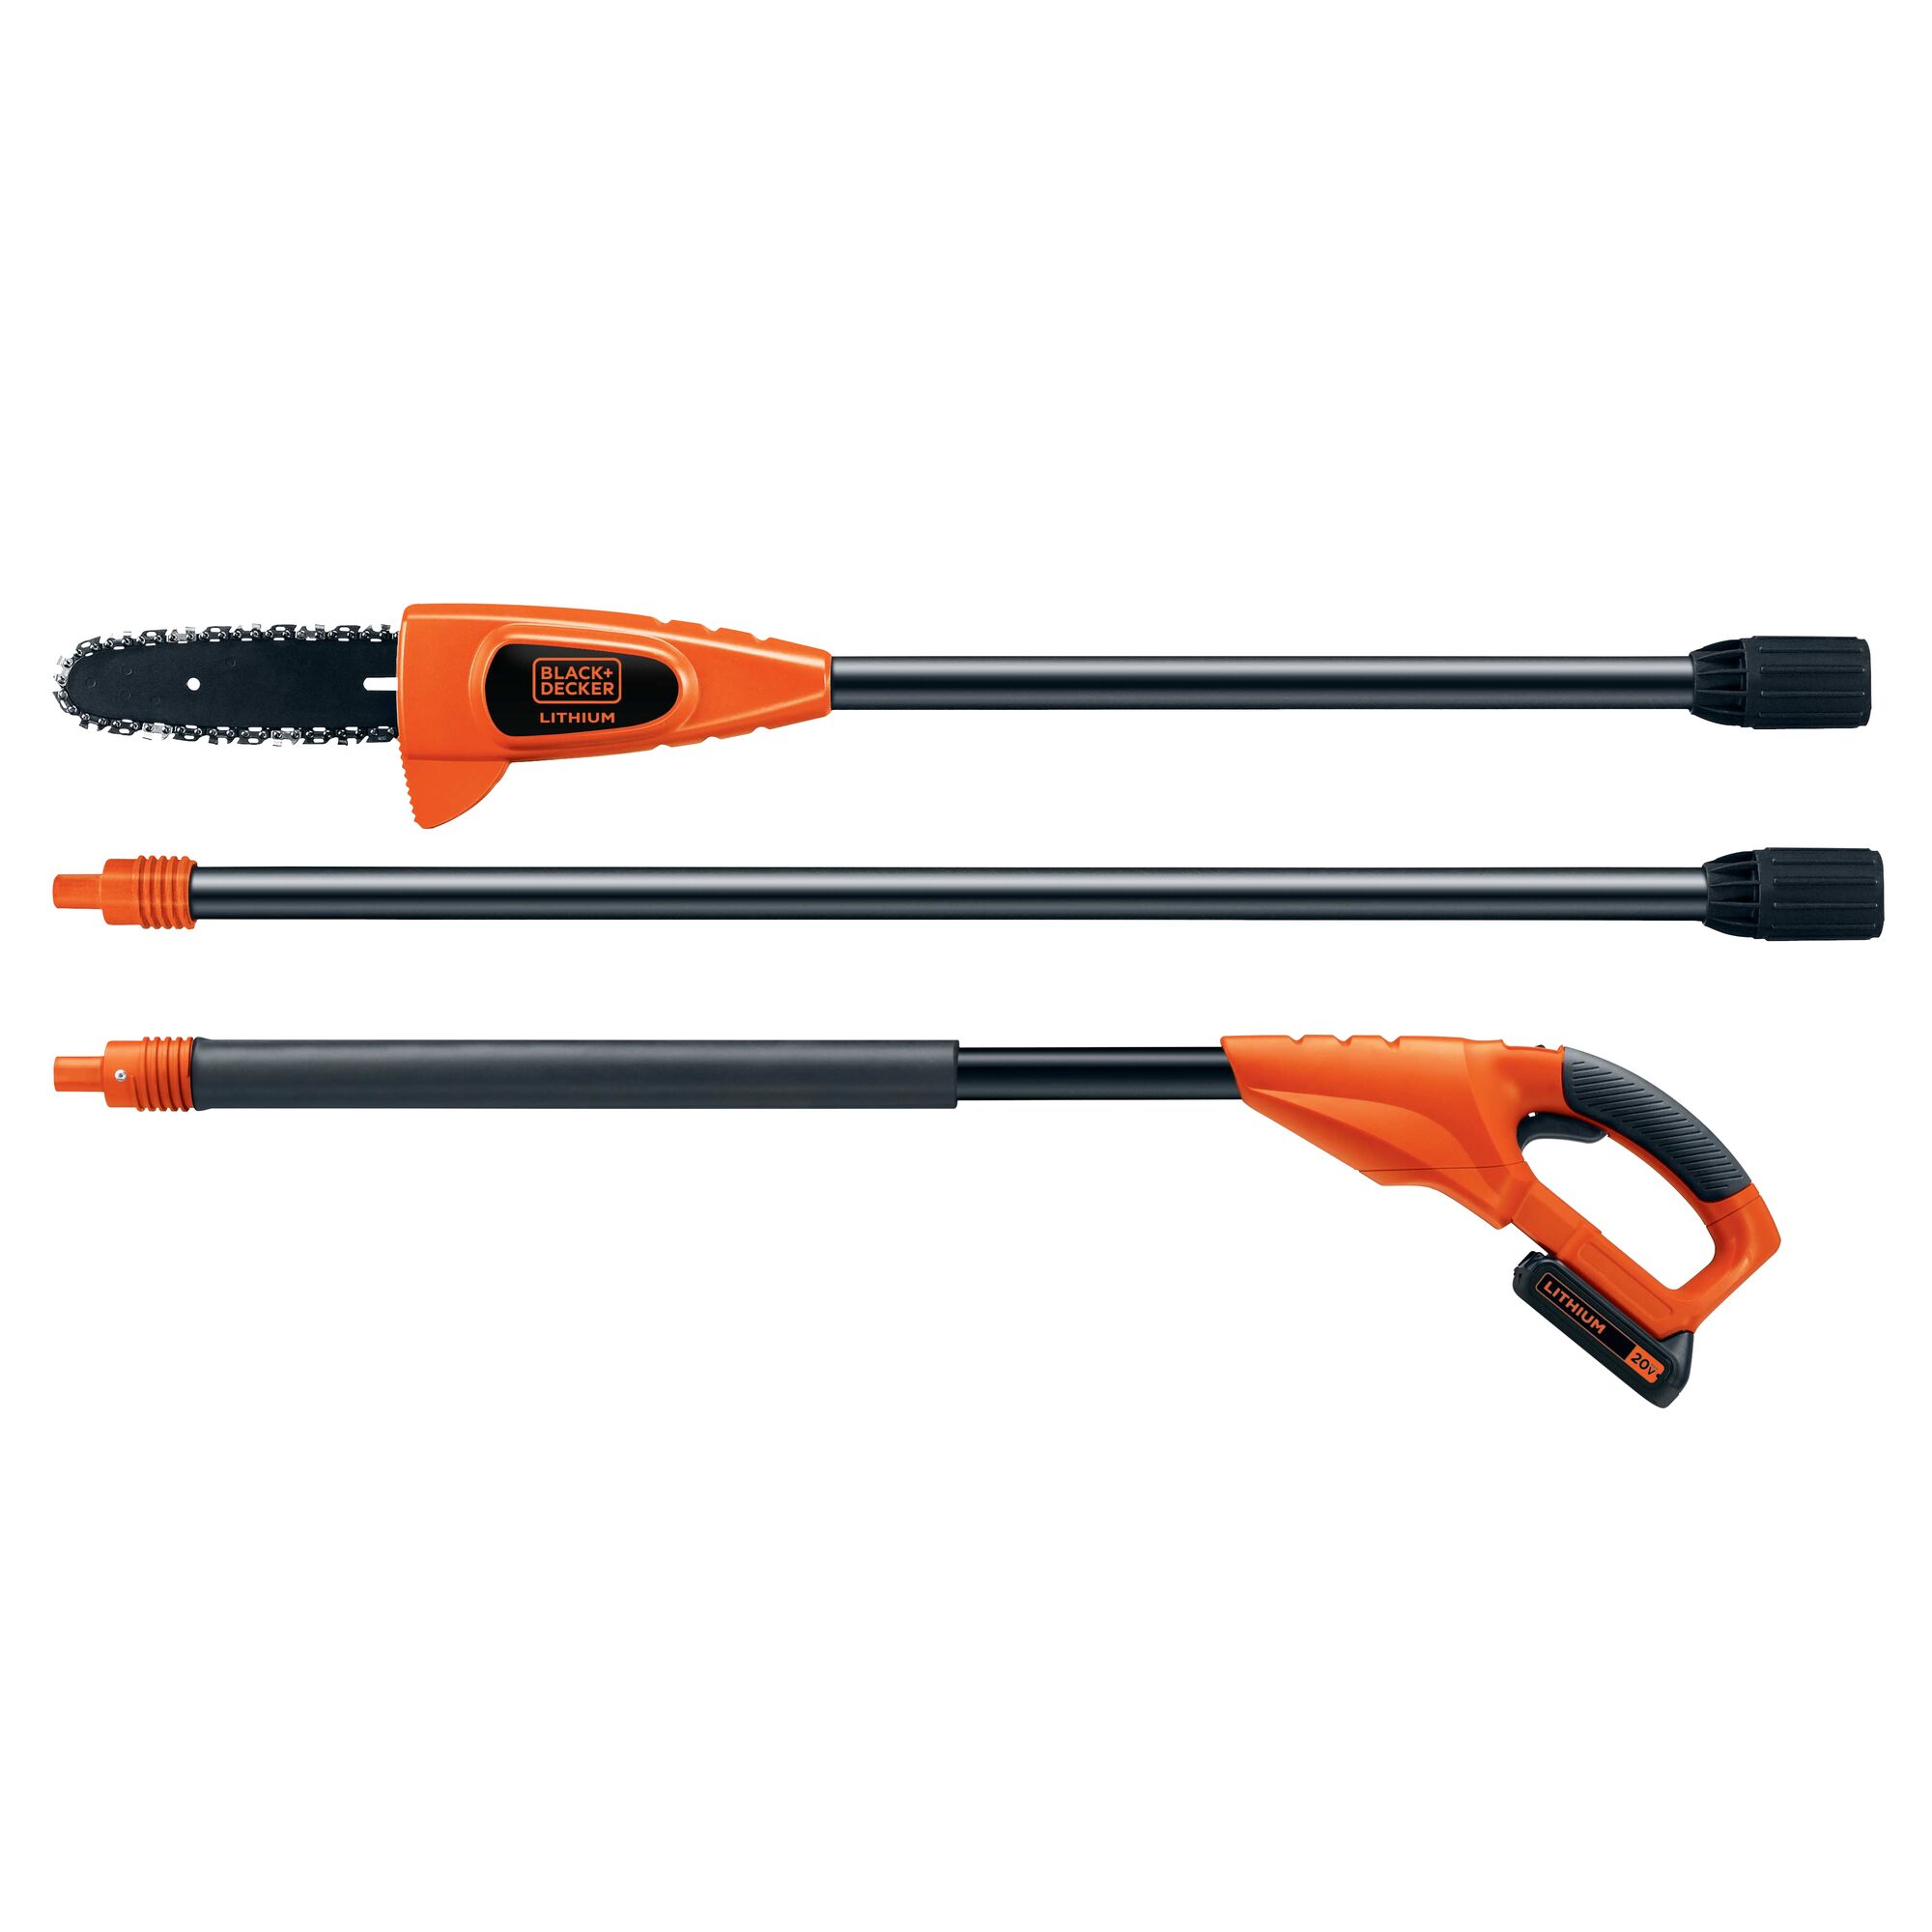 Lithium pole pruning saw in three separate pieces.